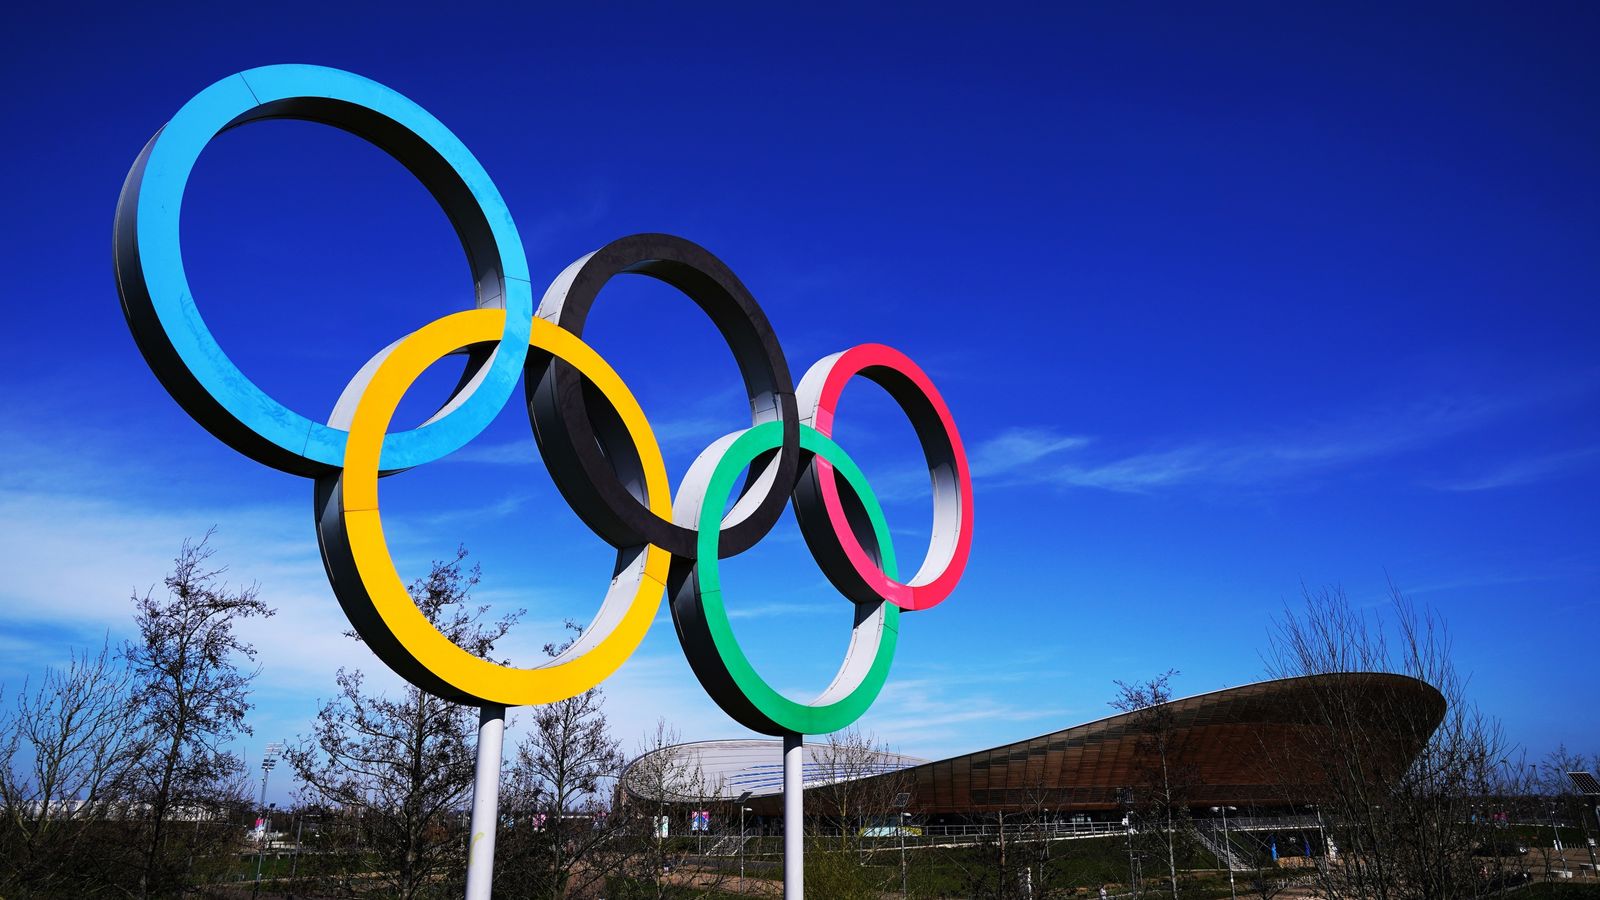 London 2012 Olympics: Destination of £1bn govt cash spent in wake of games unknown, say MPs